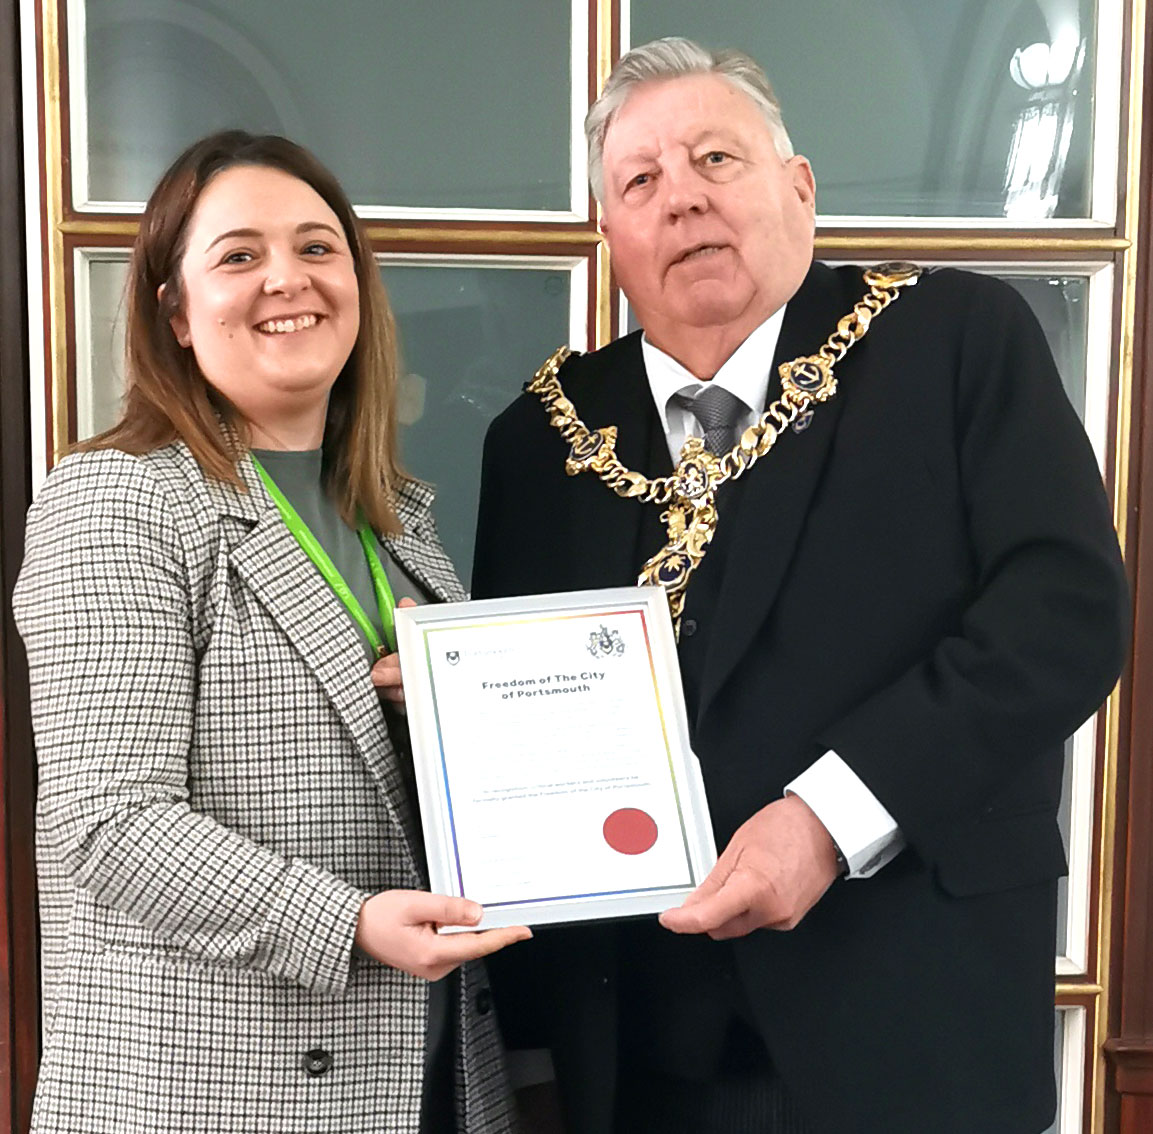 Annett freedom of the city of Portsmouth